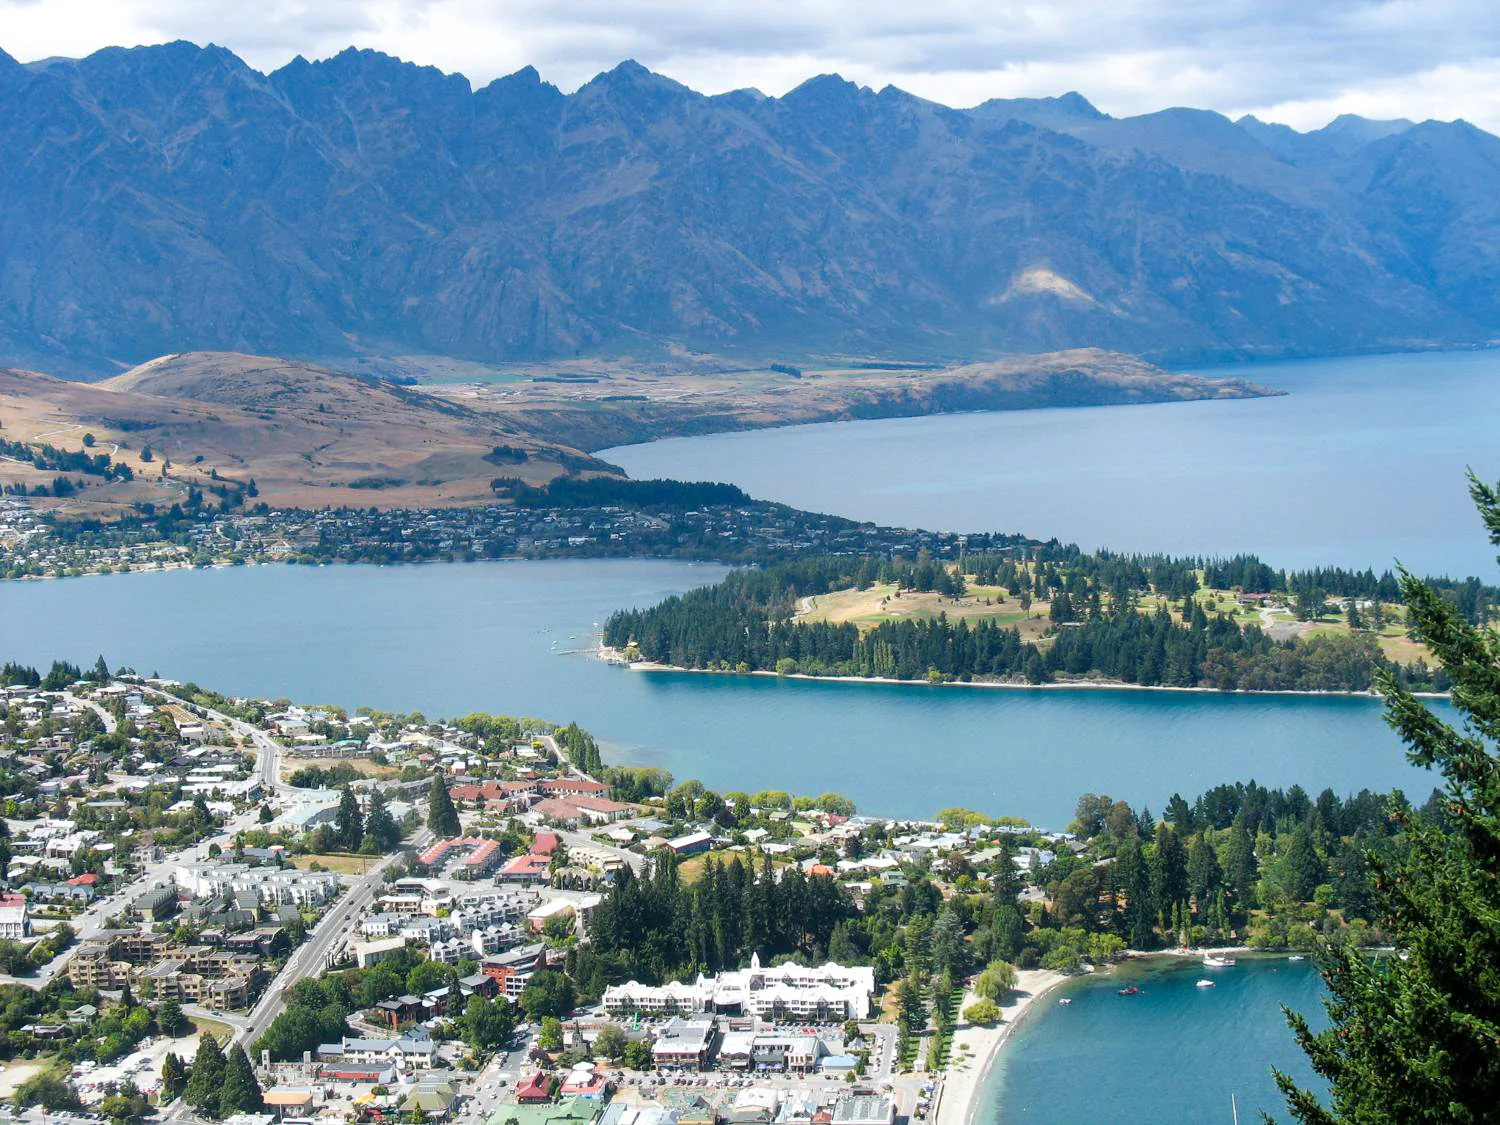 Learn about the education system in New Zealand in this guest blog post & grab a freebie, too! | The ESL Connection